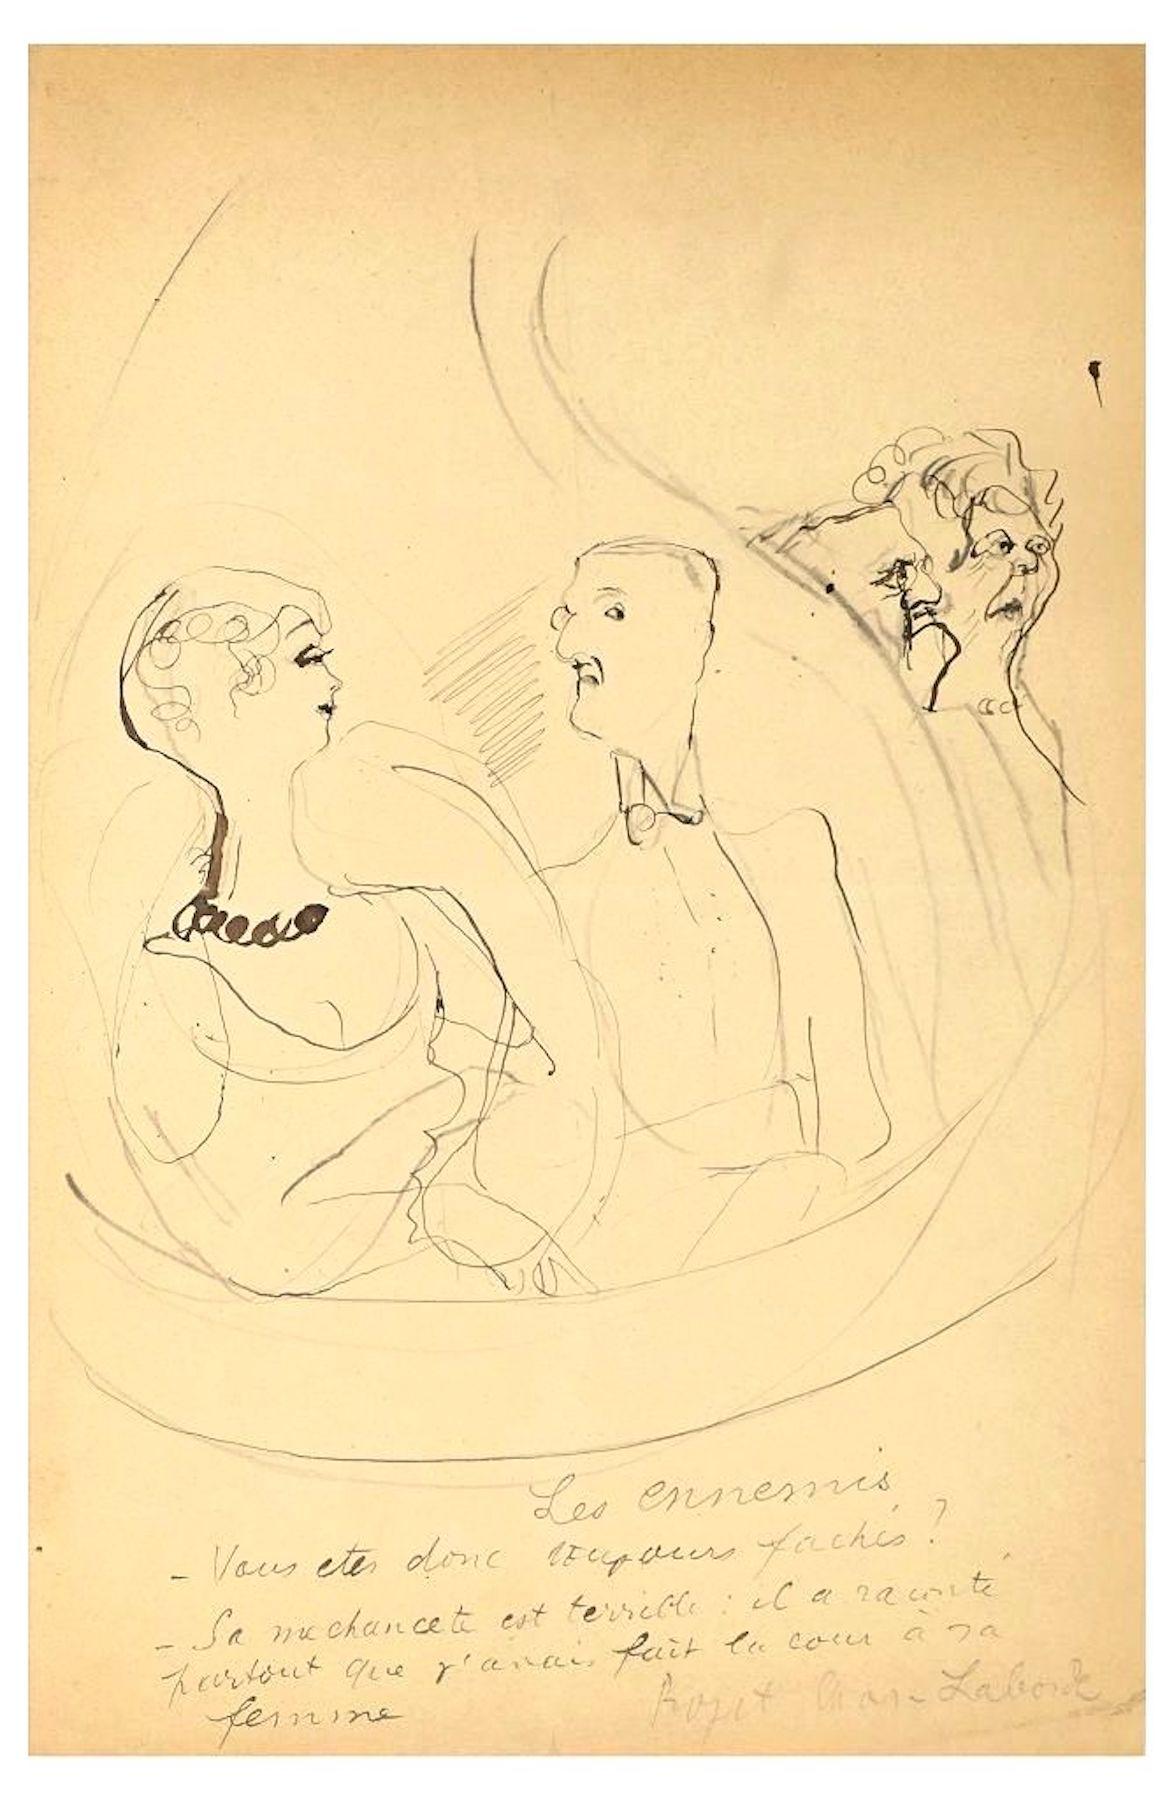 People Conversation - China Ink Drawing by Chas Laborde - Early 1900